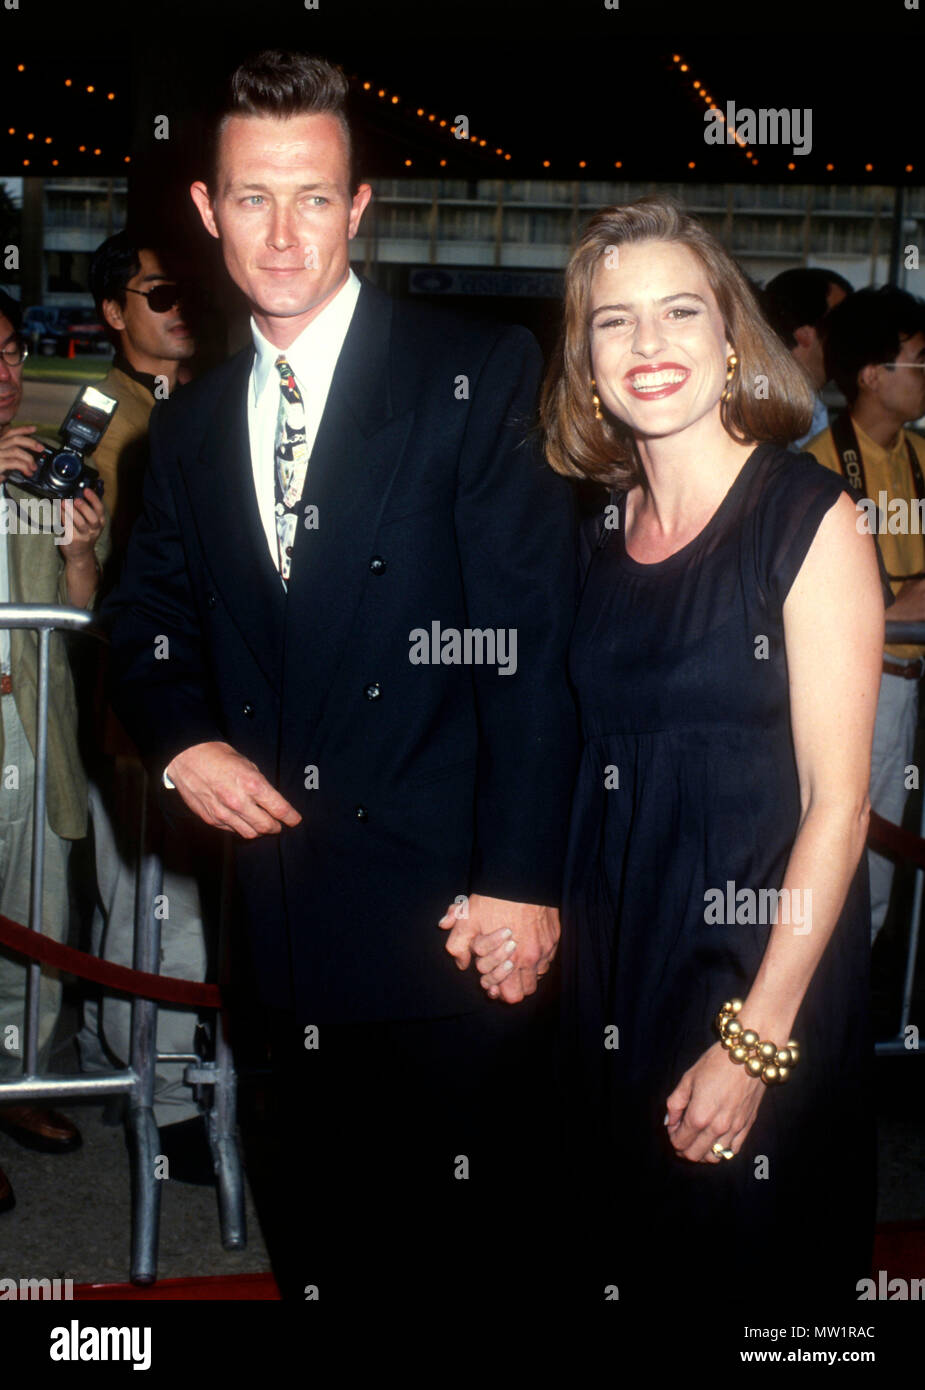 LOS ANGELES, CA - JULY 1: (L-R) Actor Robert Patrick and wife Barbara Patrick attend the 'Terminator 2: Judgement Day' Los Angeles Premiere on July 1, 1991 at Cineplex Odeon Cinemas in Los Angeles, California. Photo by Barry King/Alamy Stock Photo Stock Photo